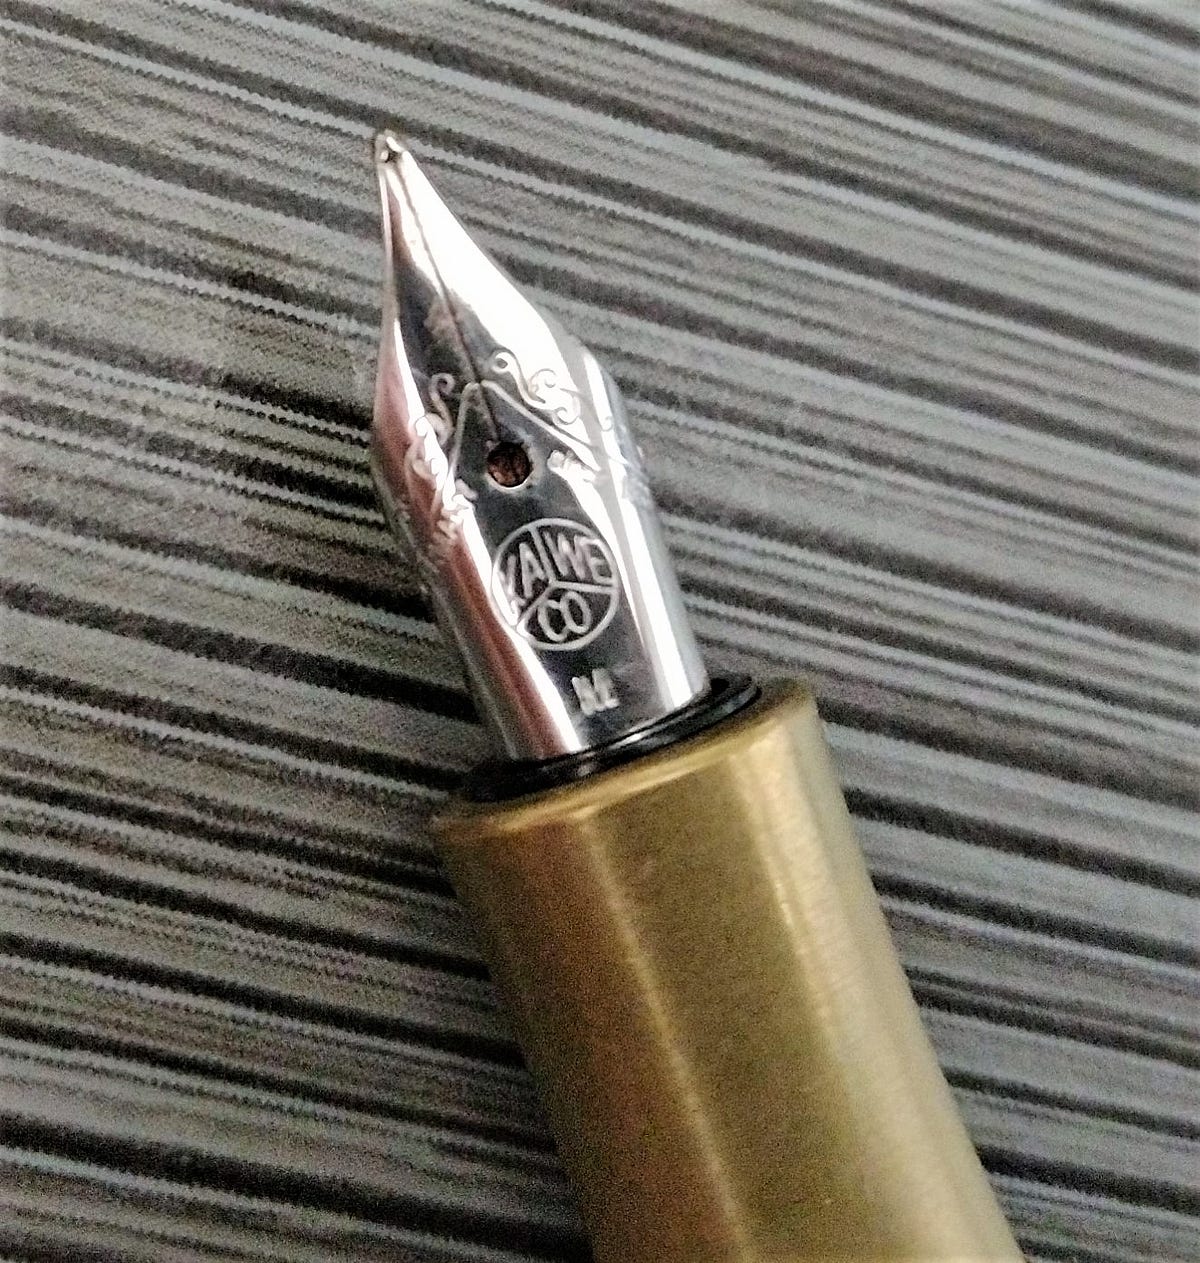 Kaweco Brass Sport Fountain Pen, Made Out of Real Metal, Feed Flows  Smoothly Without Wasting Ink. Soft Writing Feeling.